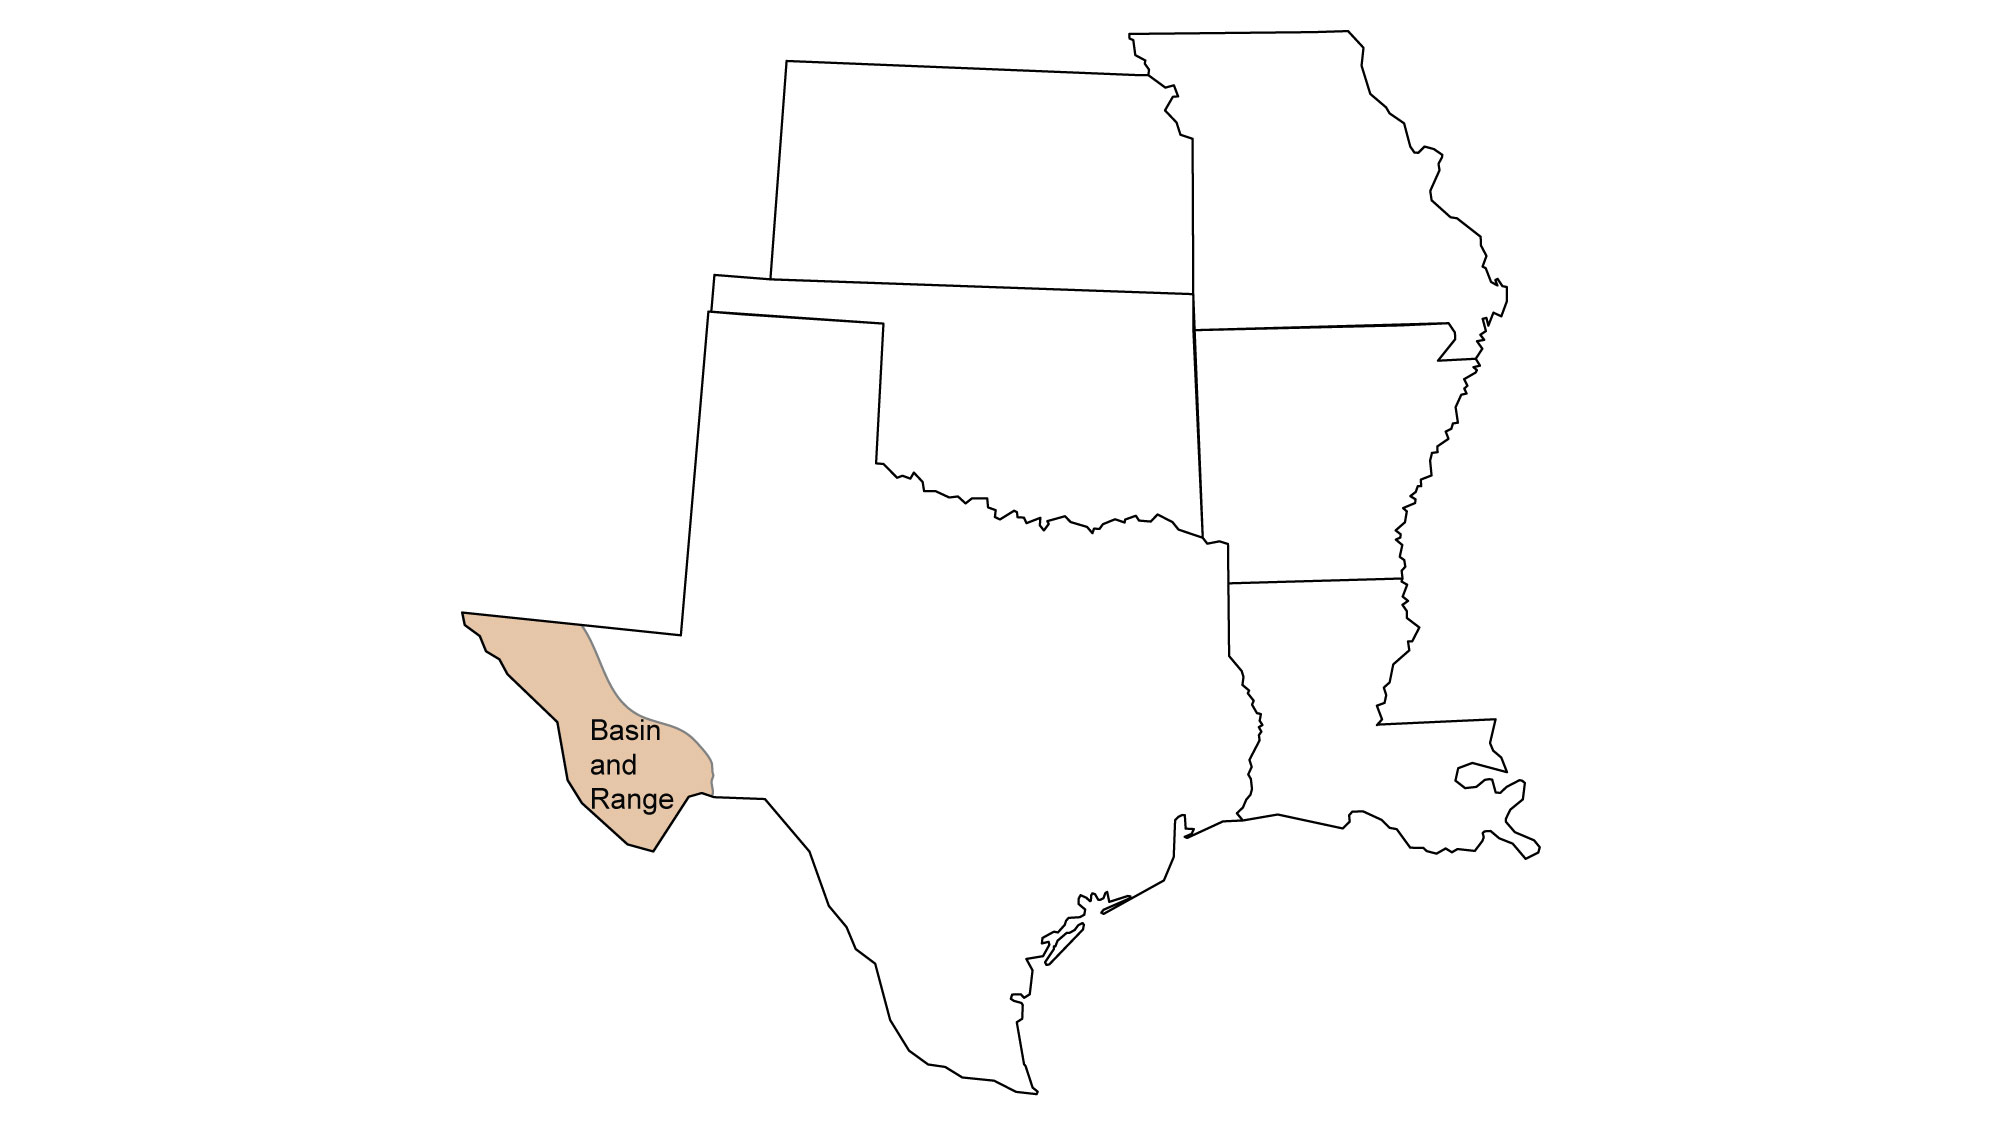 Simple map showing the Basin and Range region of the South Central United States, including a small portion of western Texas.